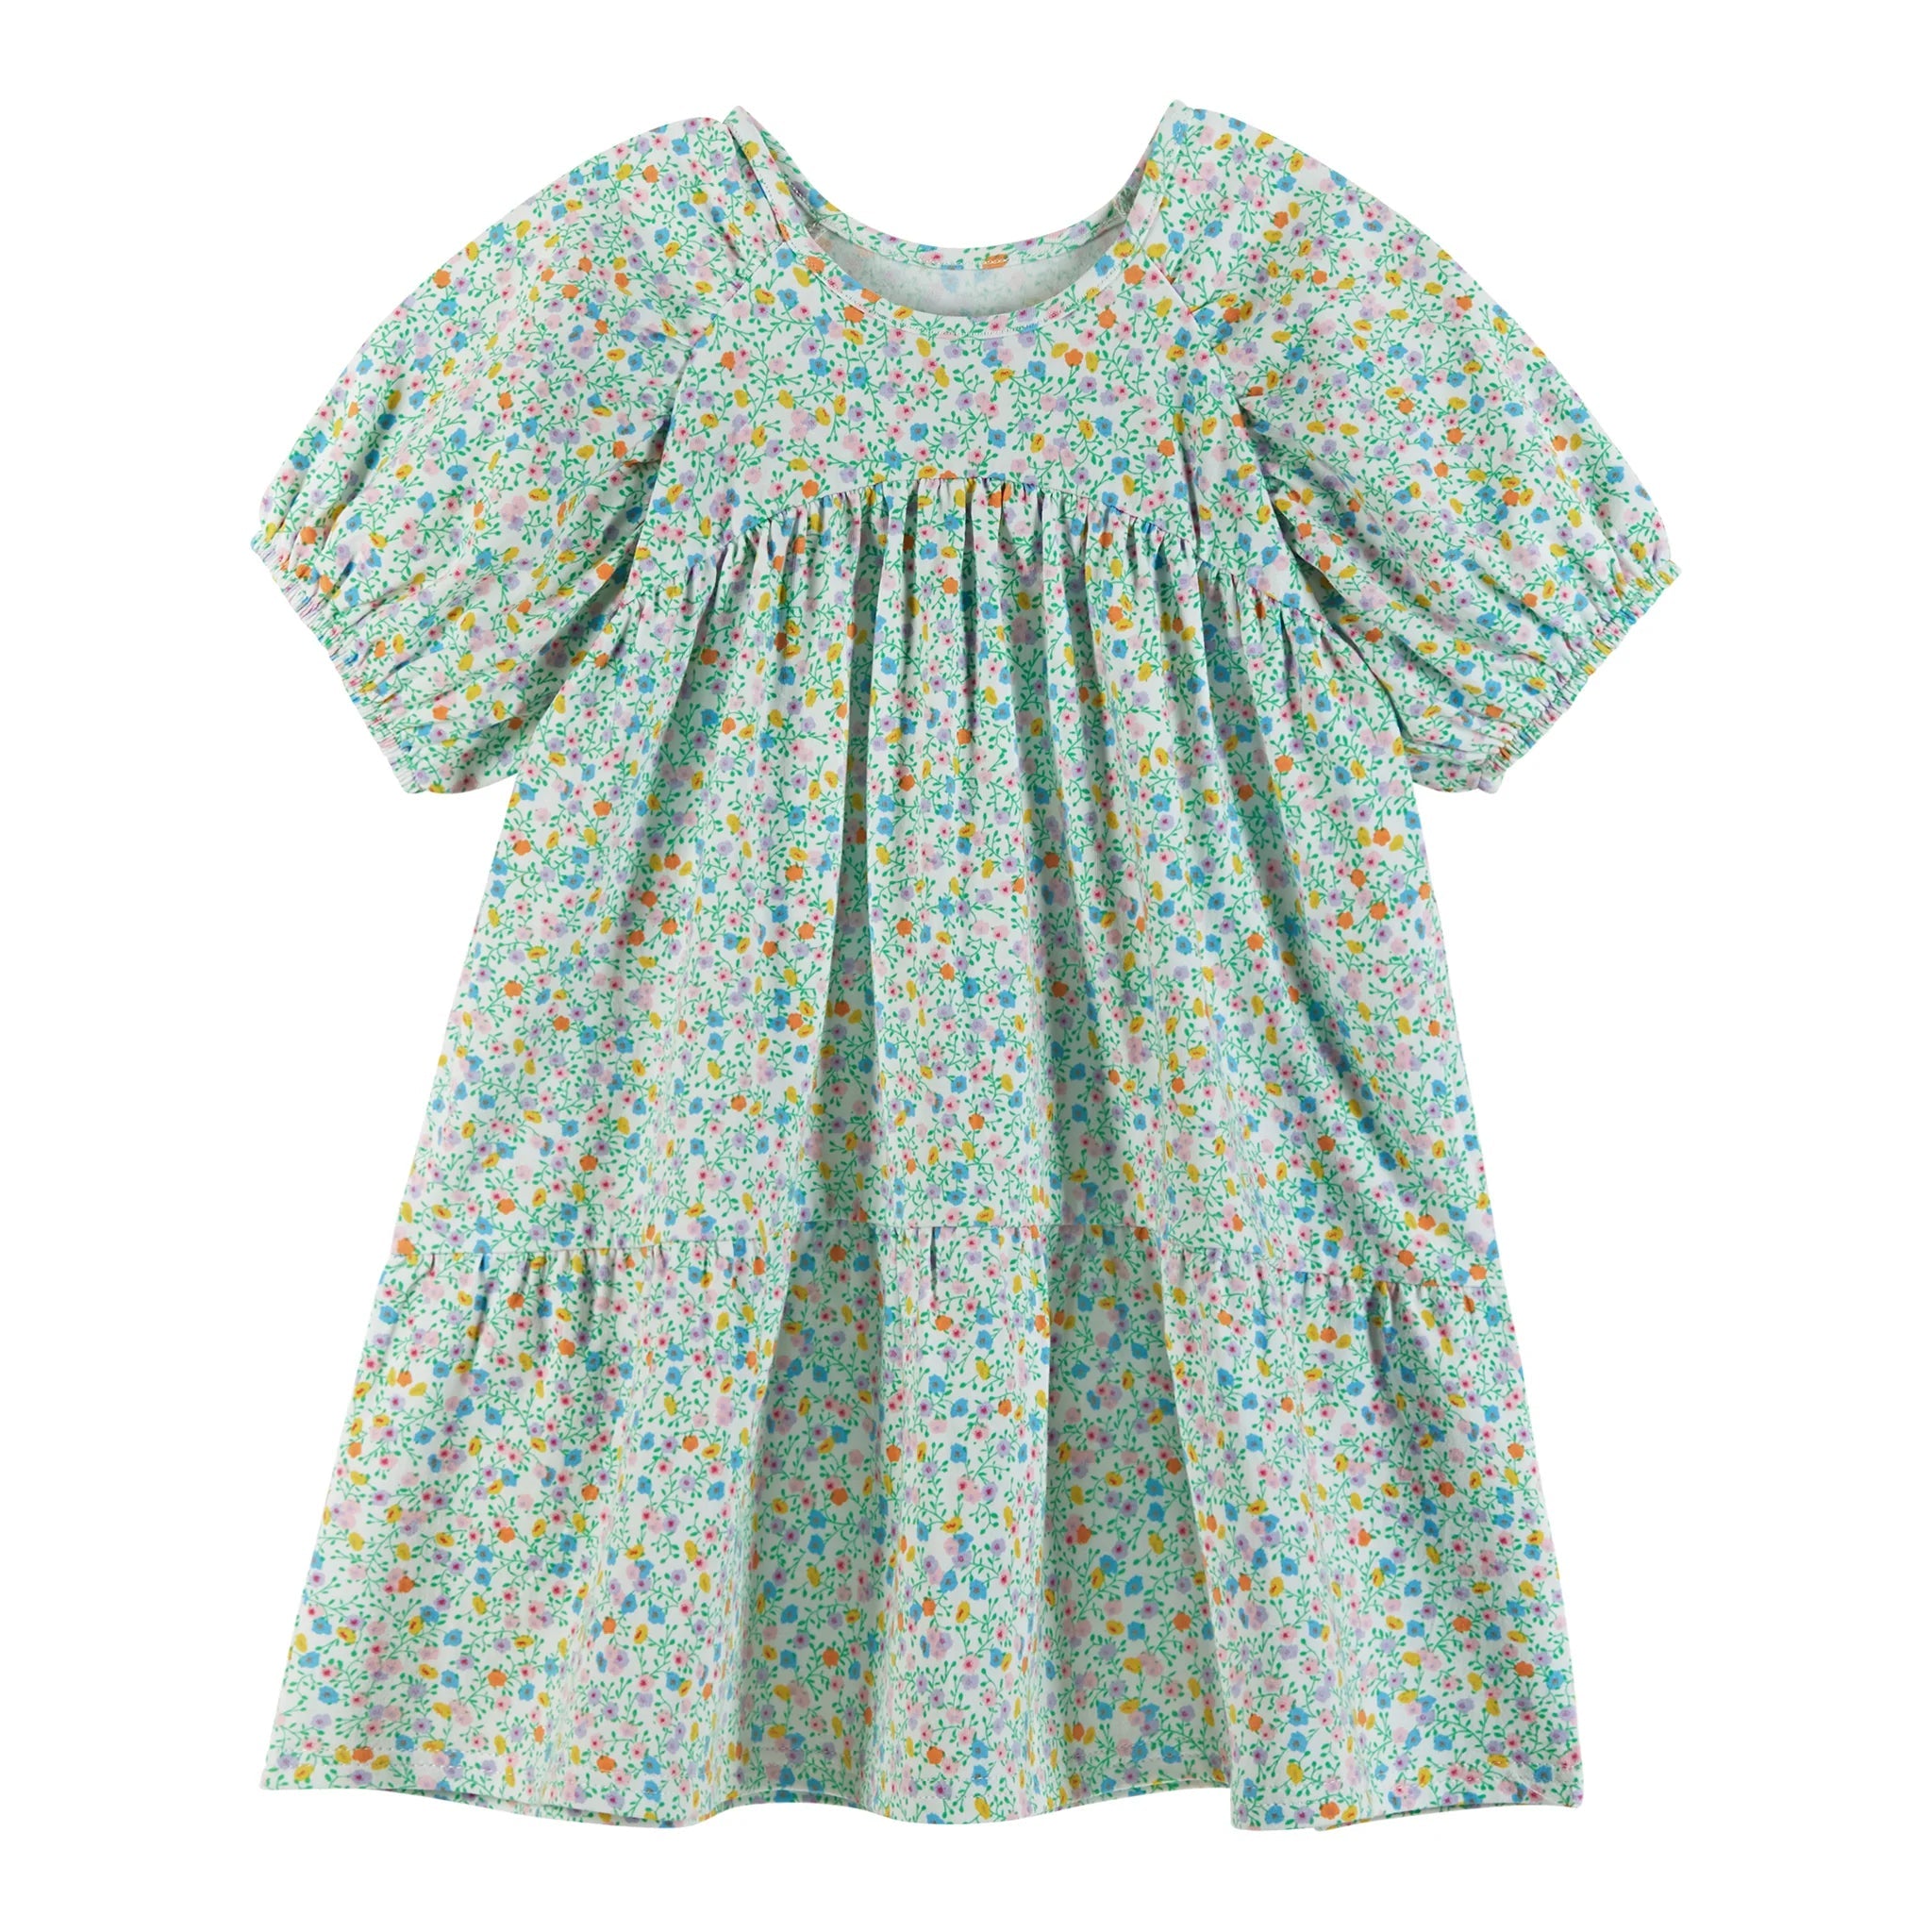 Andy & Evan White Floral Print Puff Sleeve Dress-ANDY & EVAN-Little Giant Kidz